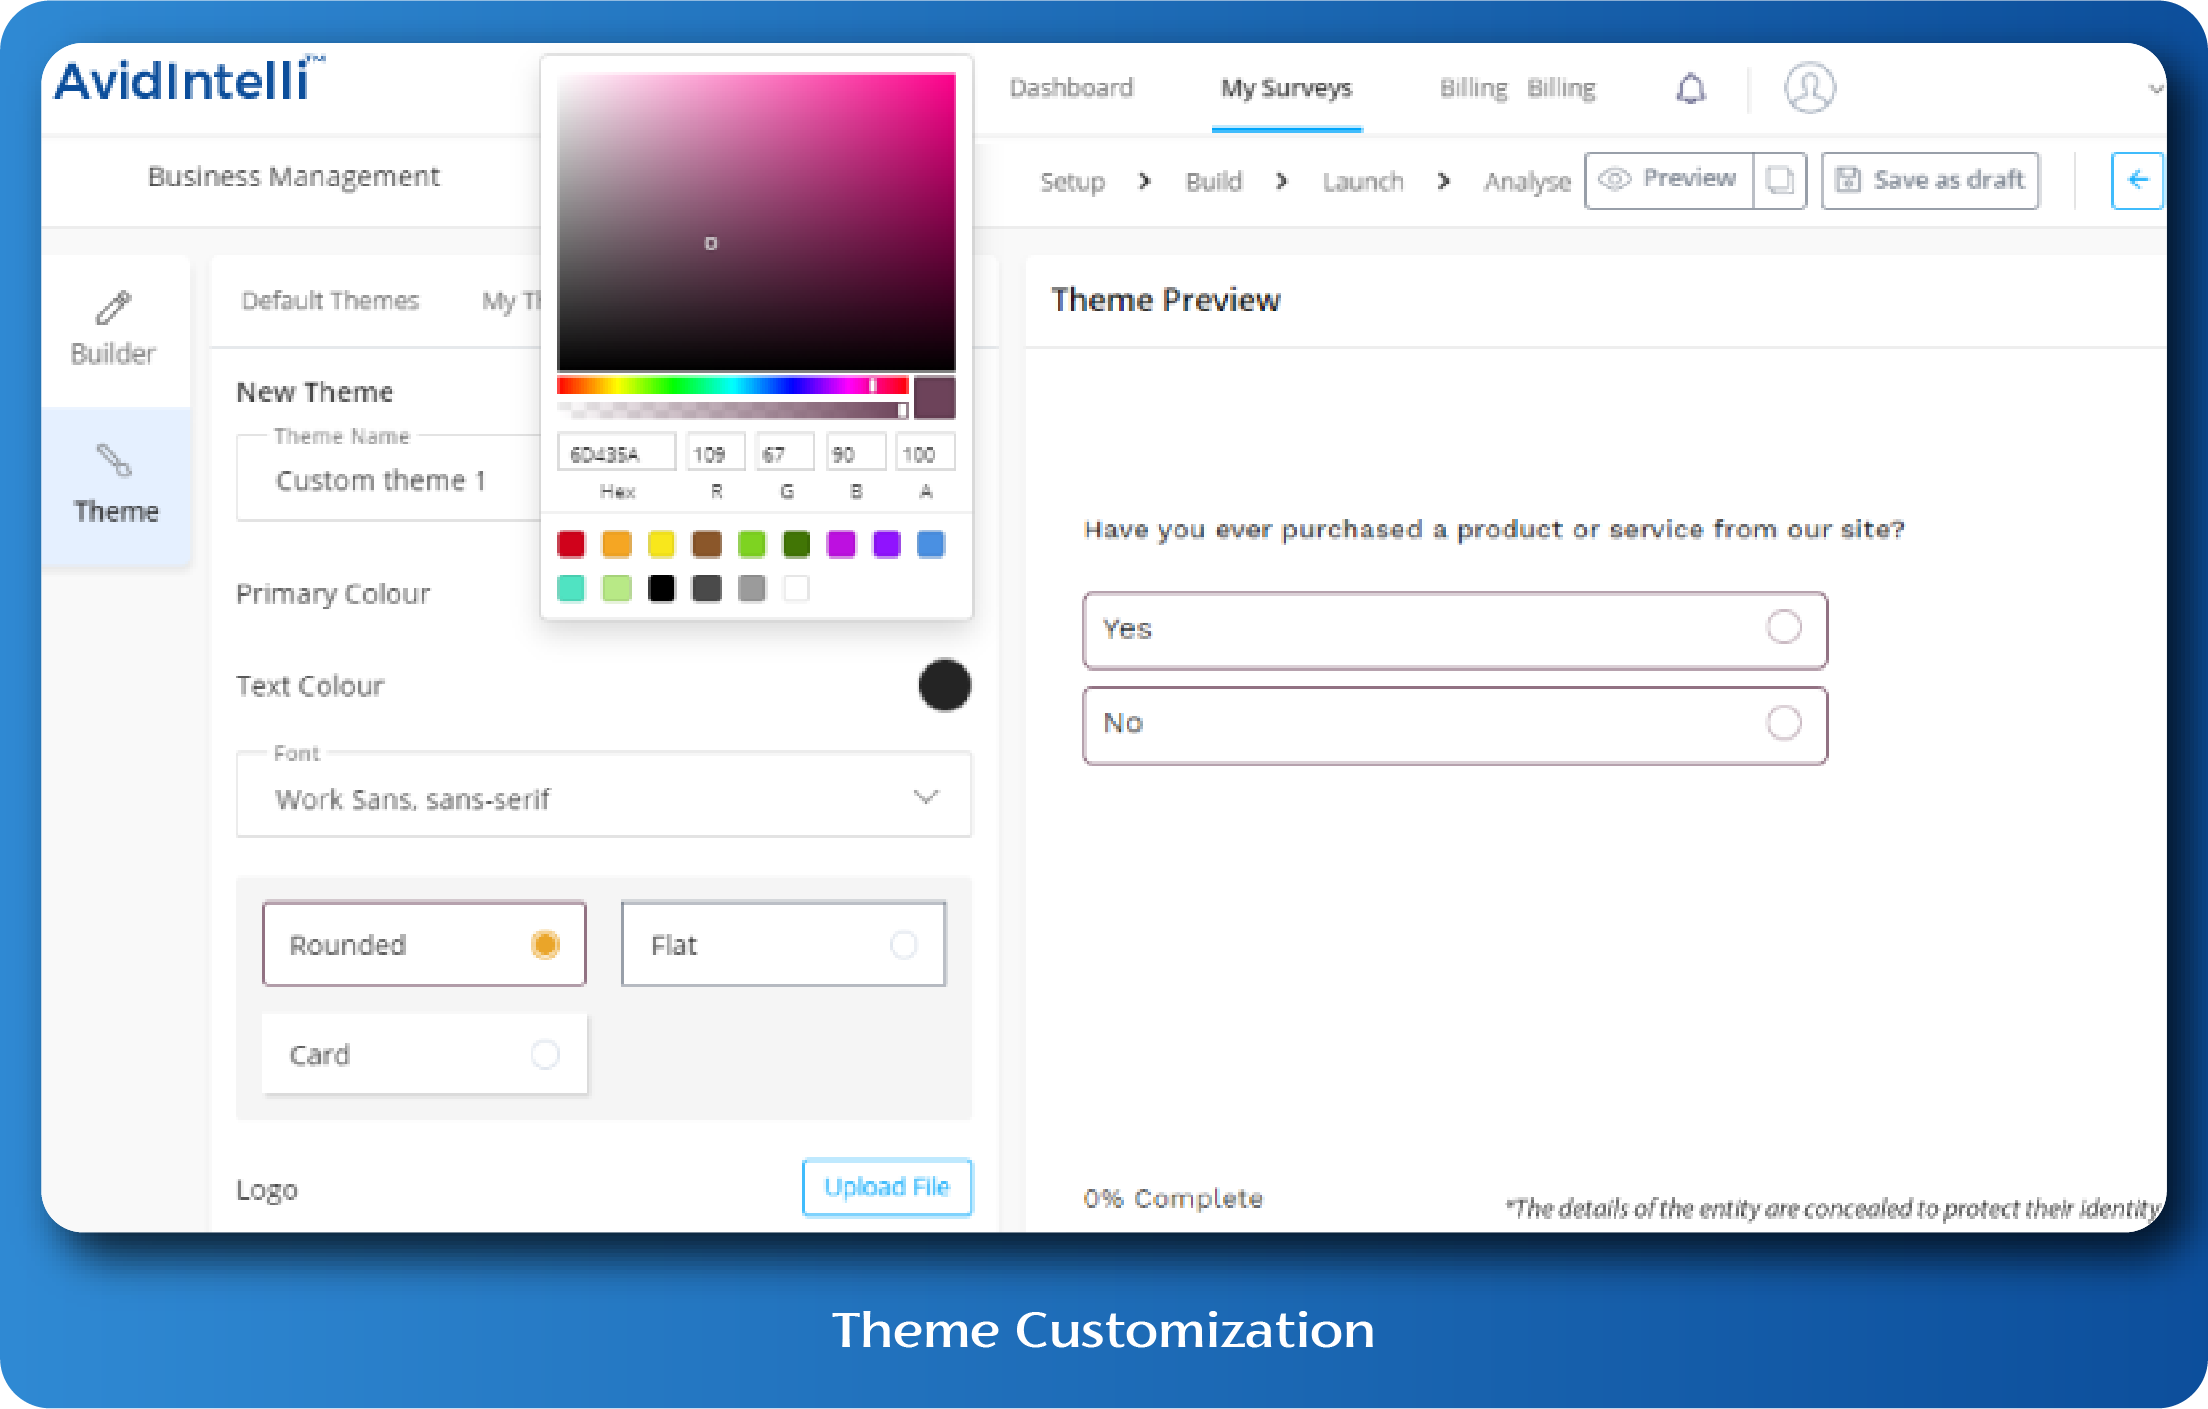 Customize your survey themes according to your brand needs